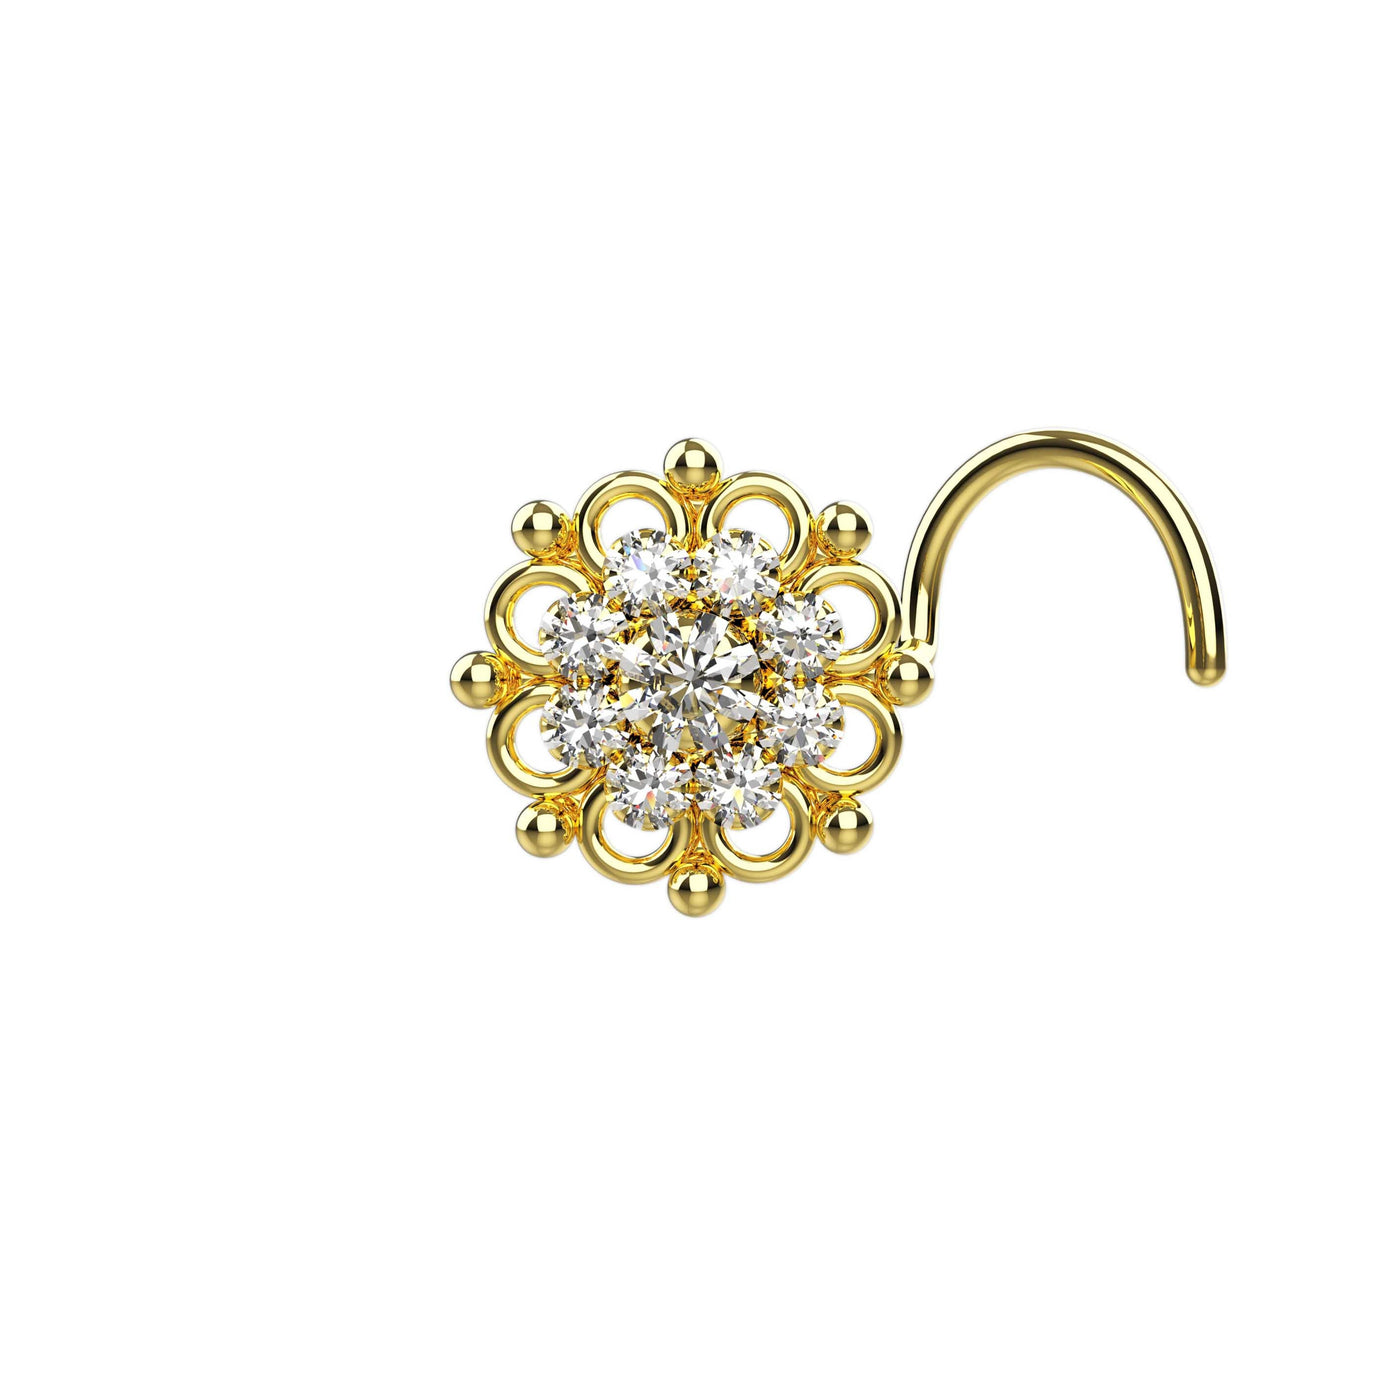 Flower nose ring gold studs